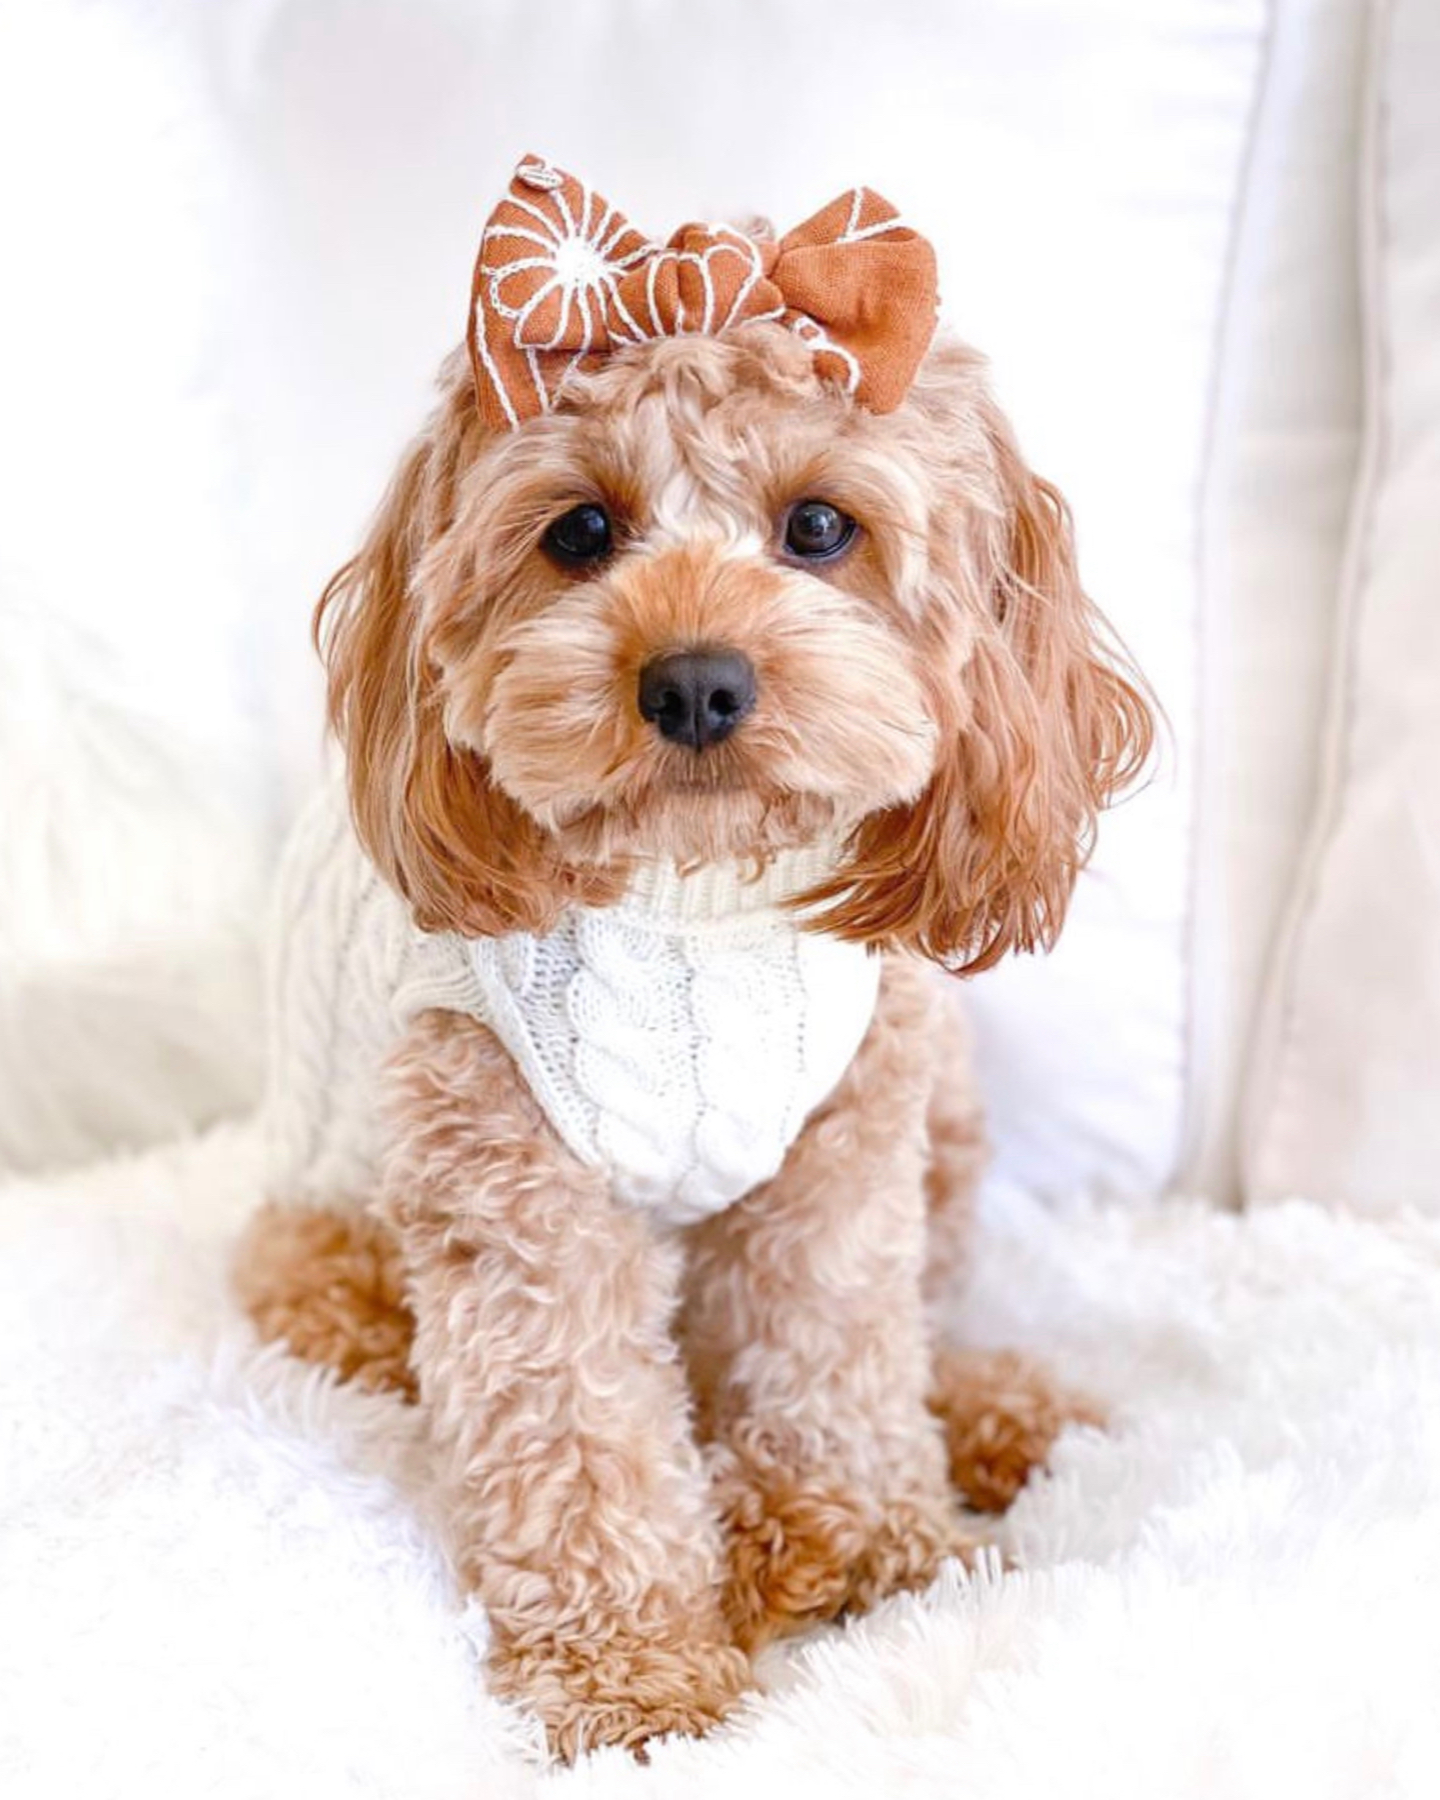 An adorable Cavoodle sitting while someone wonders why you shouldn’t get a cavapoo puppy